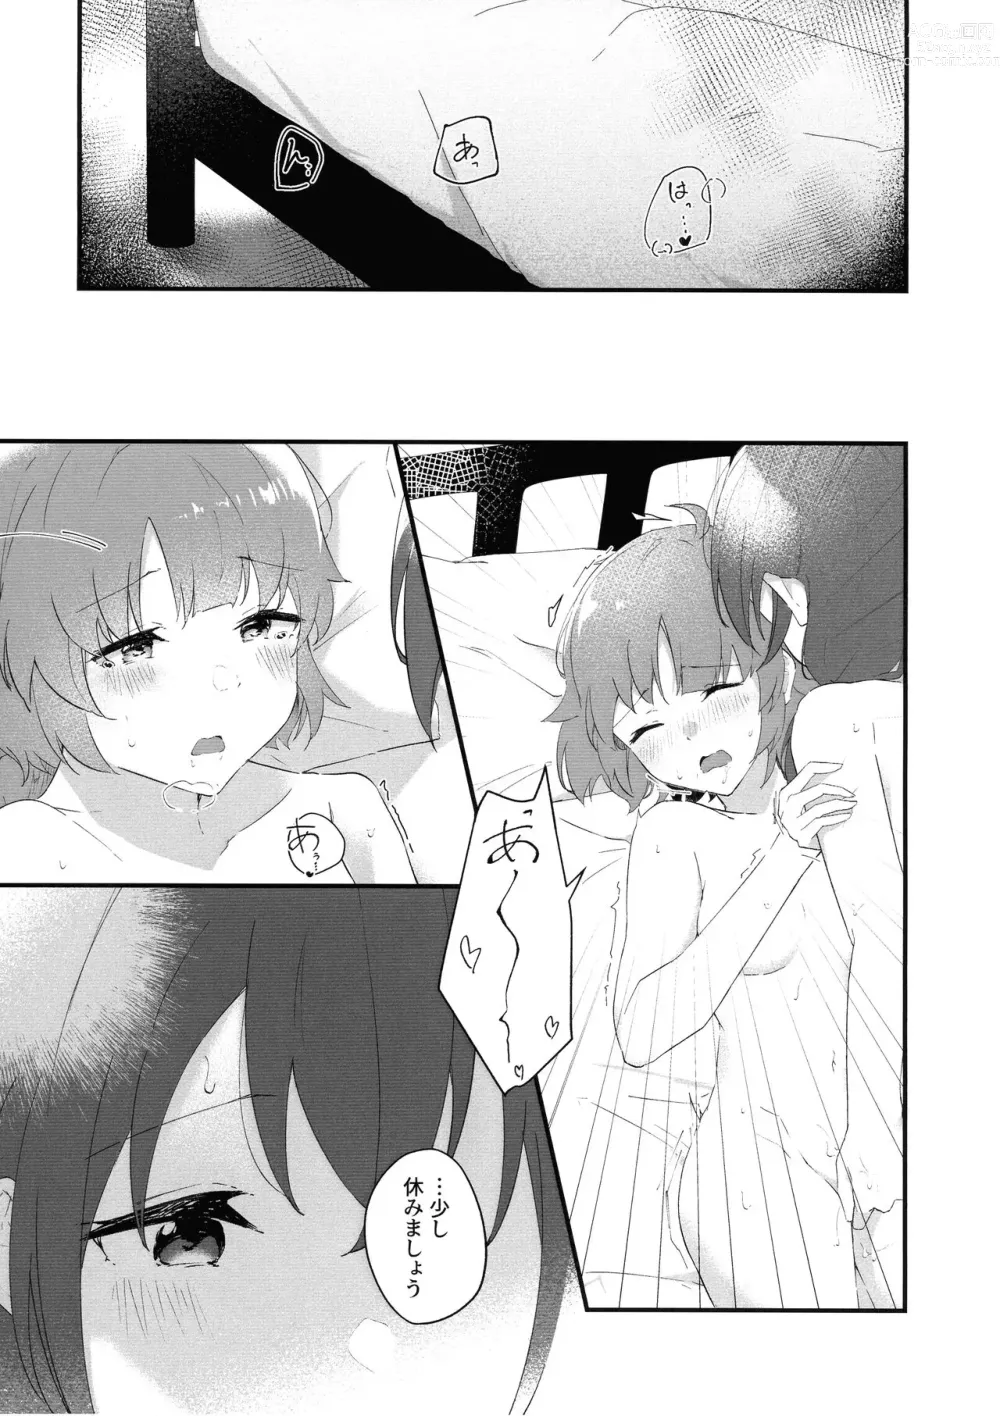 Page 6 of doujinshi Mabataki - without blink, could not find it